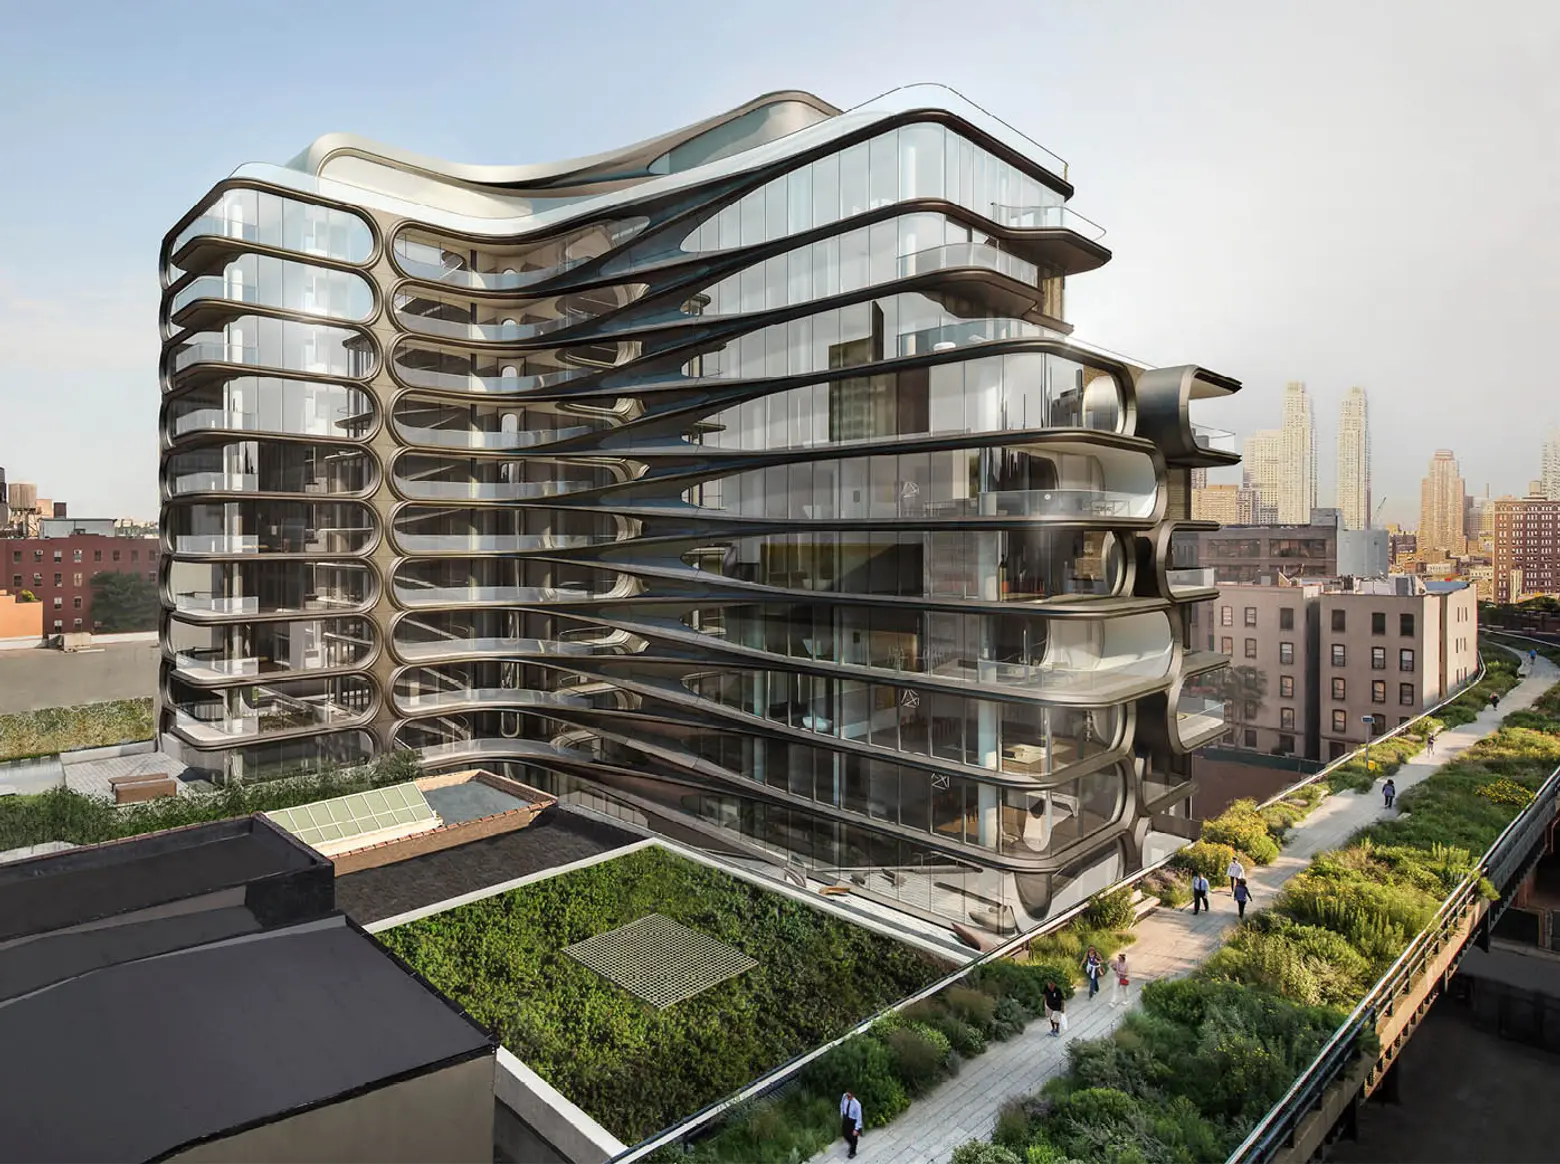 Zaha Hadid’s futuristic 520 West 28th Street gets rental listings, from $15,000/month